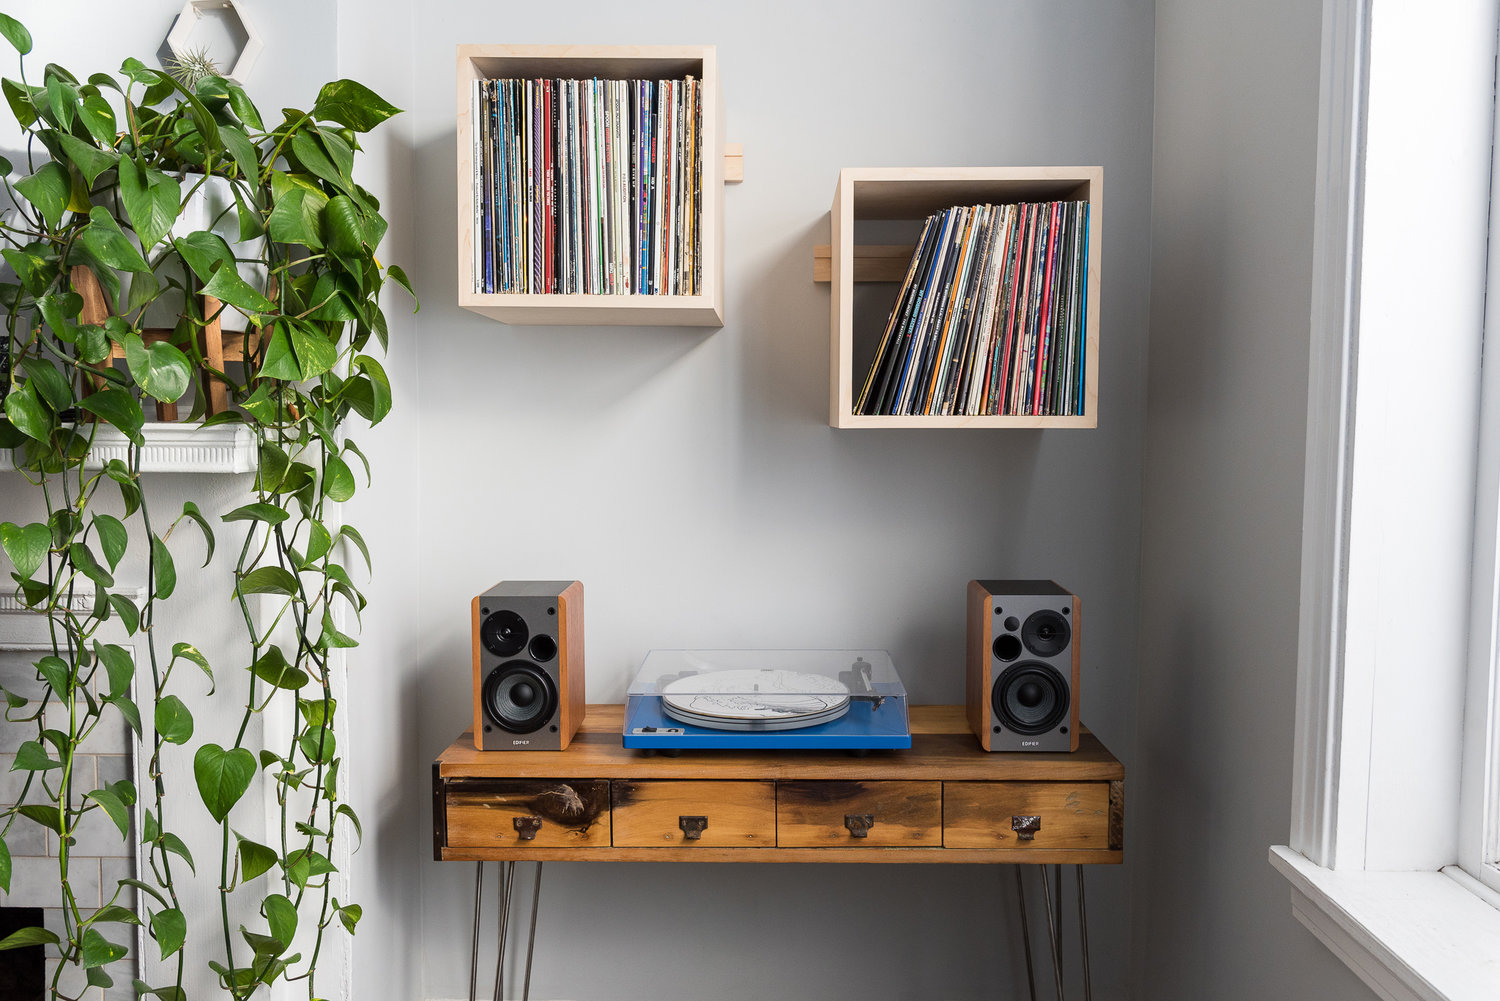 We designed and made our wall-mounted cube shelves and record display racks because we think they are the best.